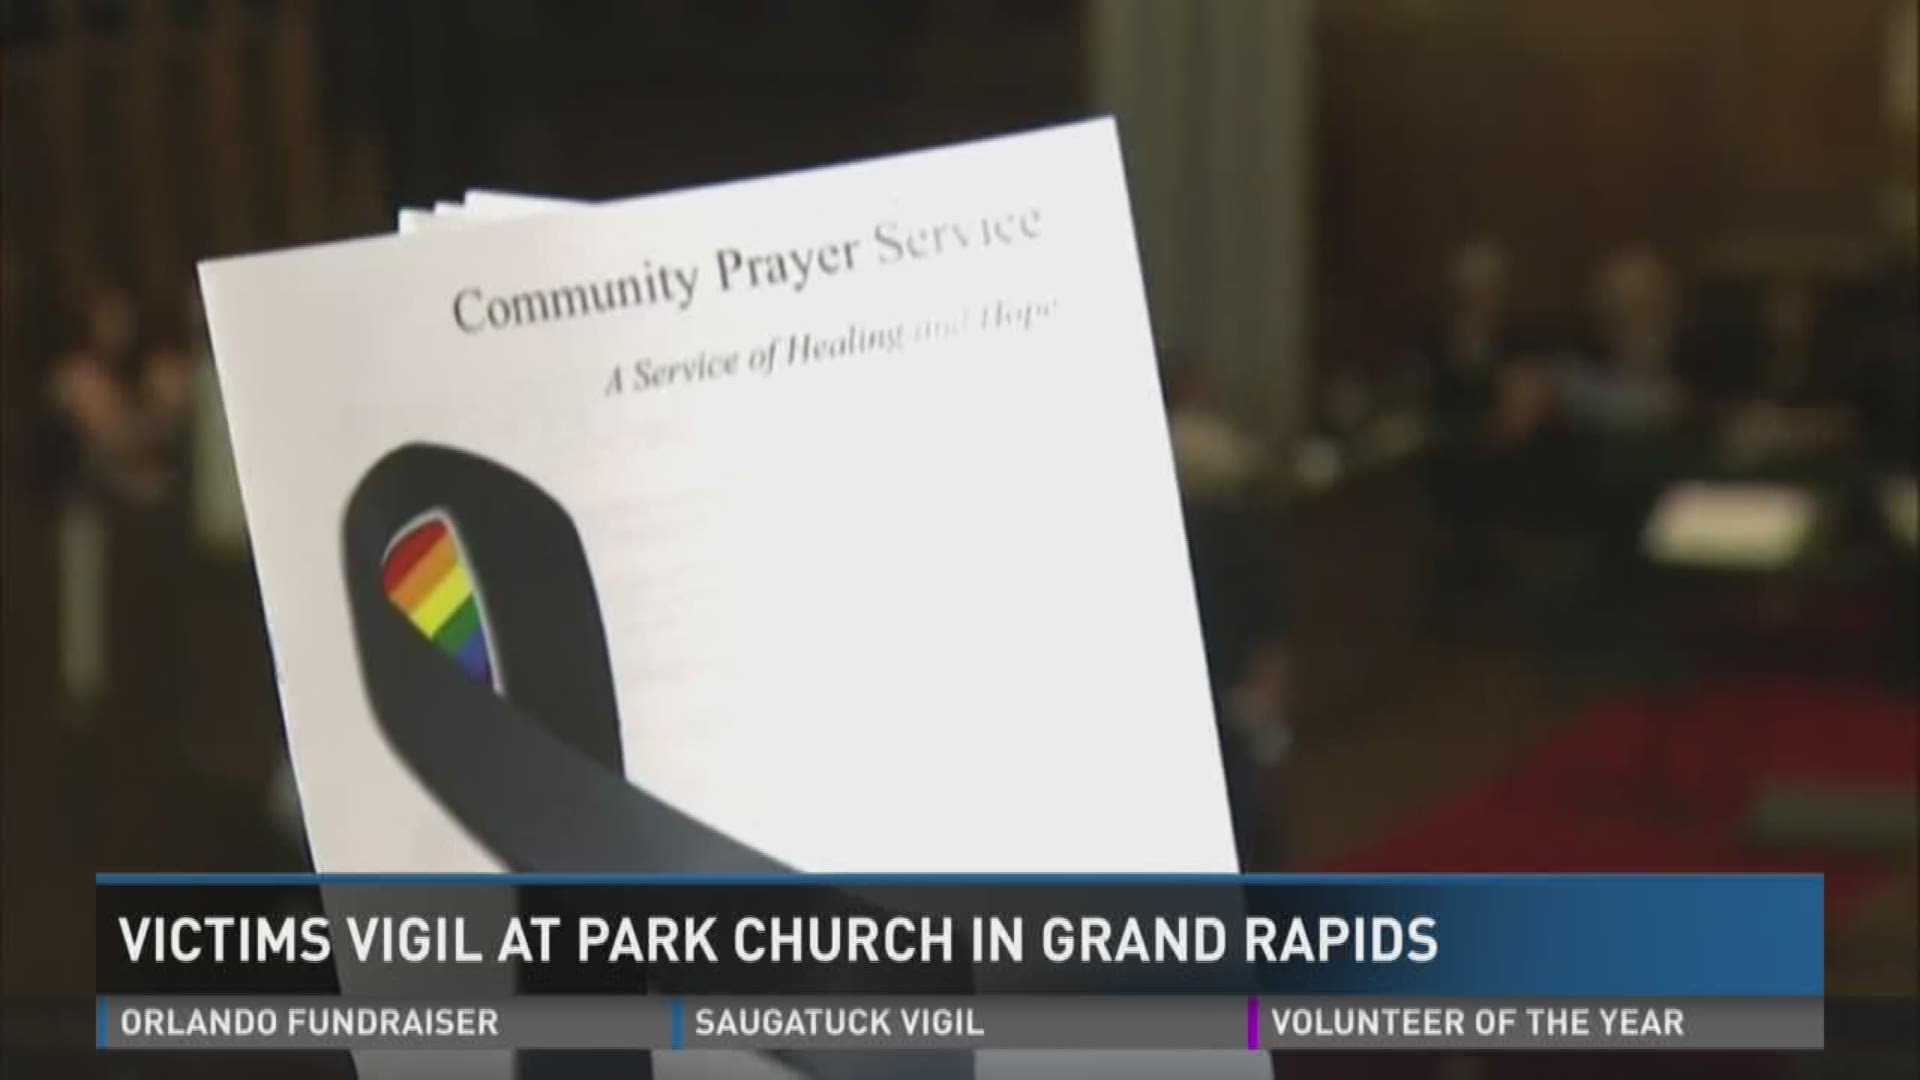 In Grand Rapids tonight an interfaith vigil is happening at Park Church downtown.